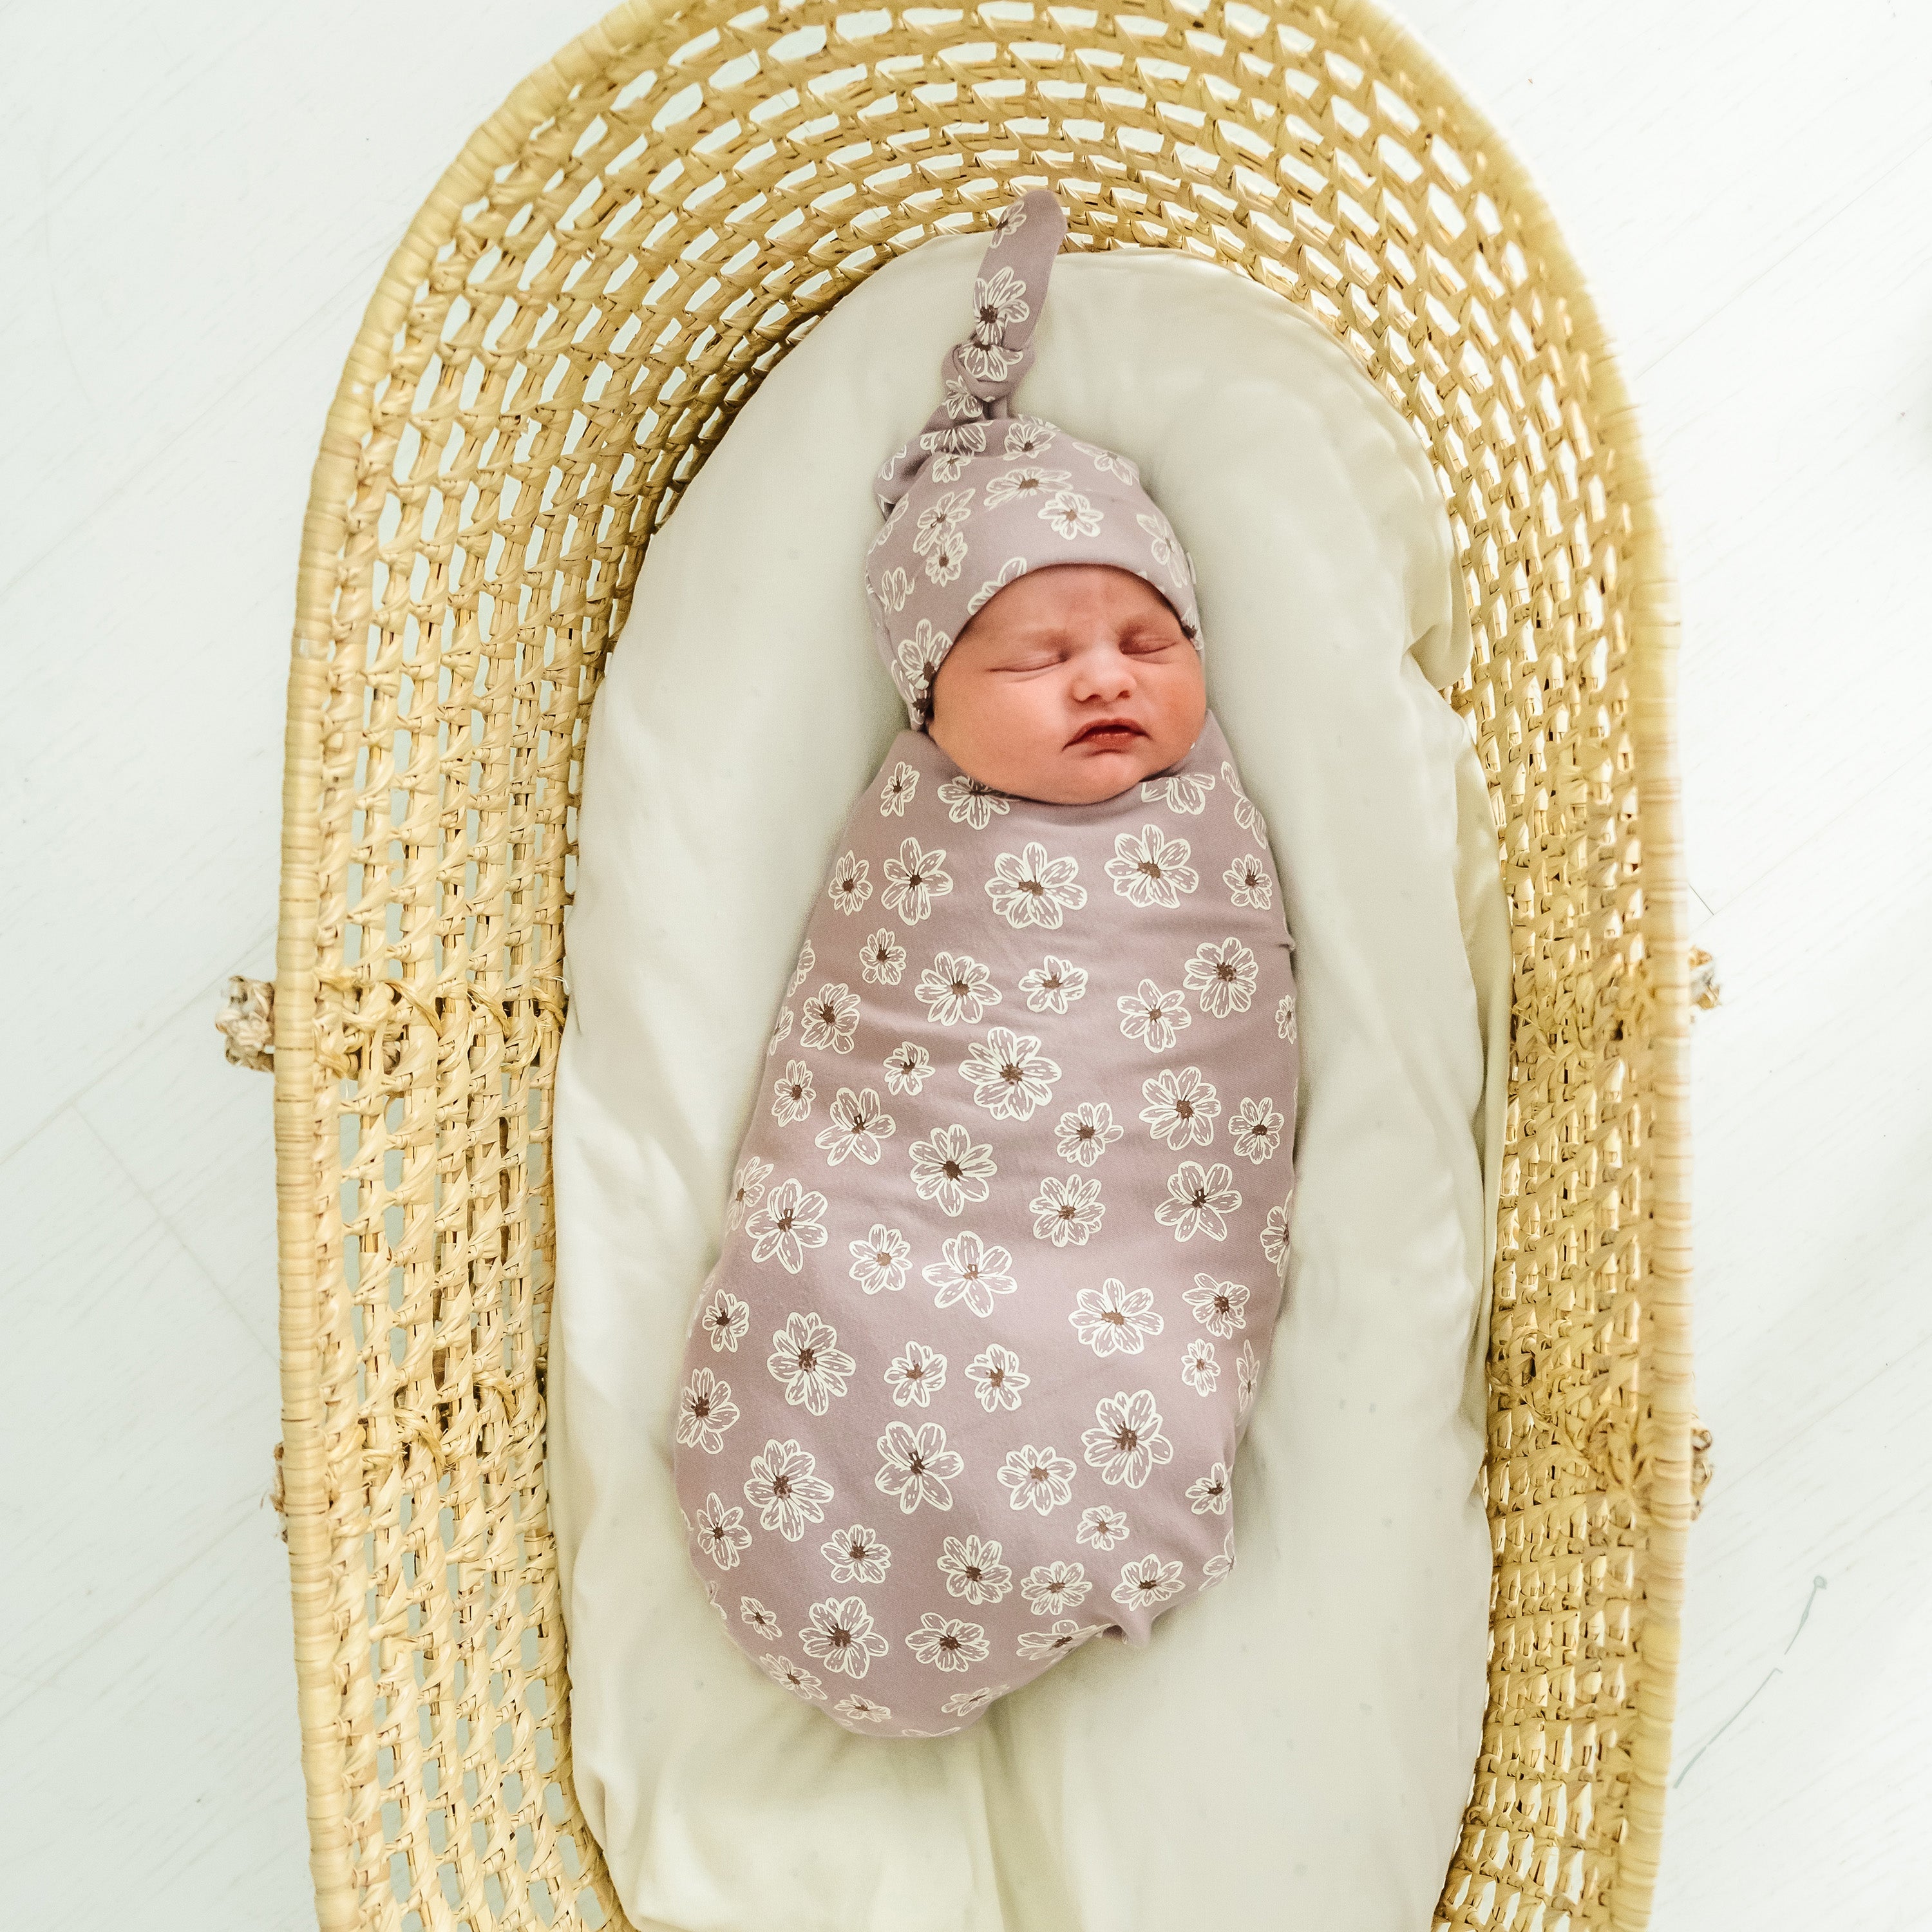 Newborn baby swaddled in a Makemake Organics Organic Swaddle Blanket & Hat in daisies pattern, lying in a woven, oval-shaped bassinet on a white background.